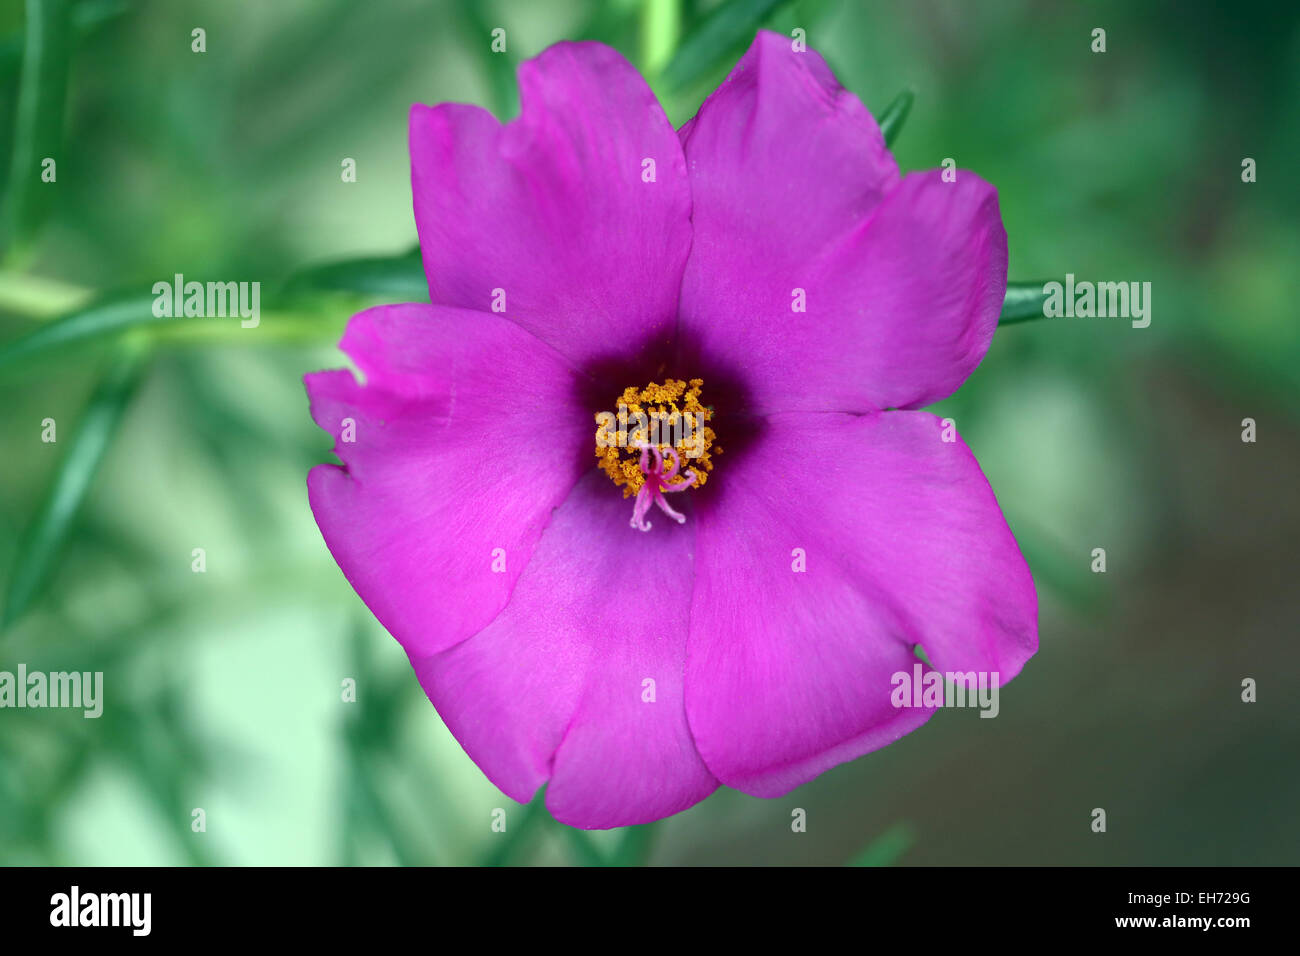 Bright pink flowers in the garden. Stock Photo